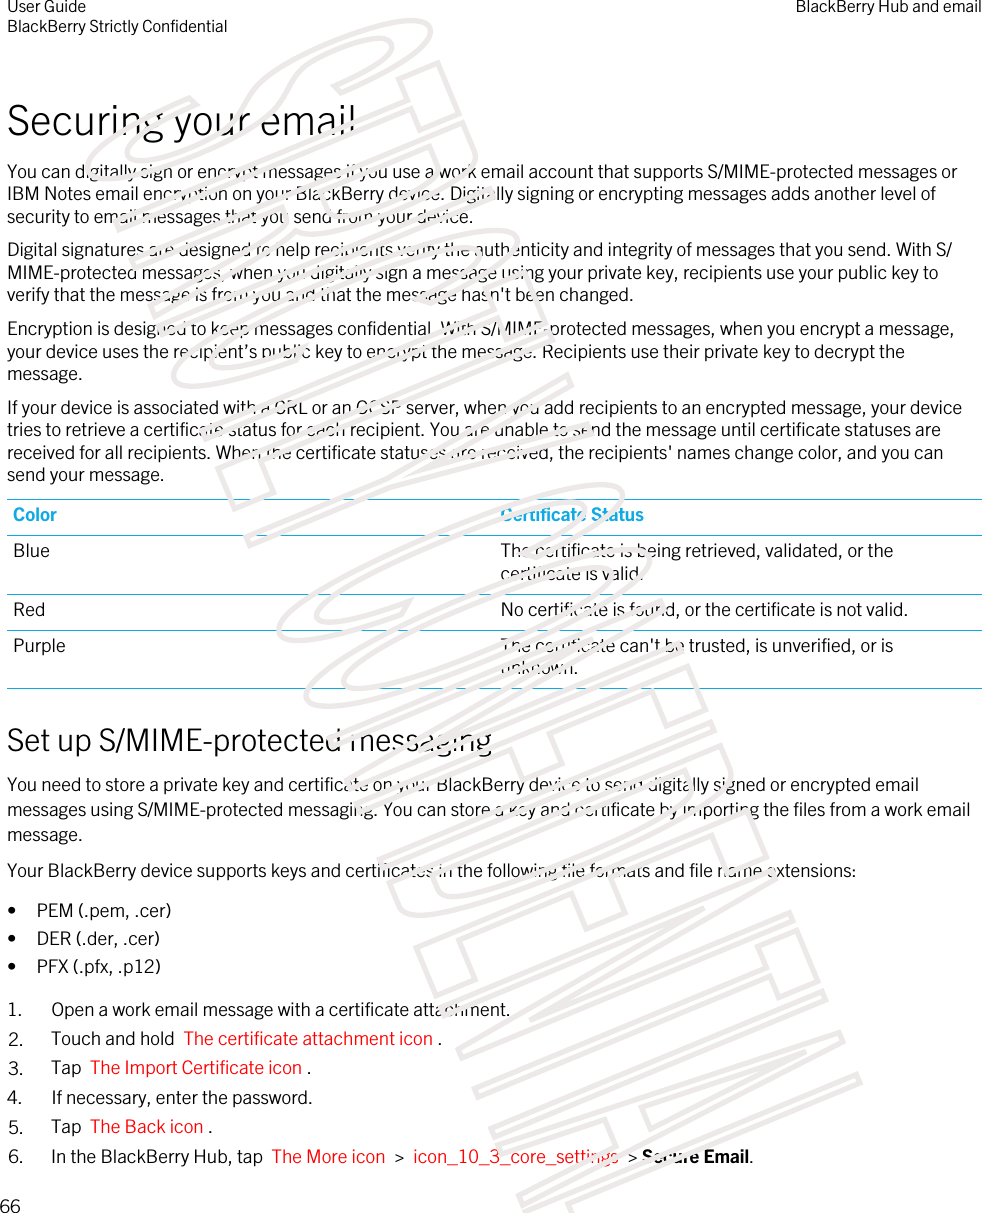 Securing your emailYou can digitally sign or encrypt messages if you use a work email account that supports S/MIME-protected messages or IBM Notes email encryption on your BlackBerry device. Digitally signing or encrypting messages adds another level of security to email messages that you send from your device.Digital signatures are designed to help recipients verify the authenticity and integrity of messages that you send. With S/MIME-protected messages, when you digitally sign a message using your private key, recipients use your public key to verify that the message is from you and that the message hasn&apos;t been changed.Encryption is designed to keep messages confidential. With S/MIME-protected messages, when you encrypt a message, your device uses the recipient’s public key to encrypt the message. Recipients use their private key to decrypt the message.If your device is associated with a CRL or an OCSP server, when you add recipients to an encrypted message, your device tries to retrieve a certificate status for each recipient. You are unable to send the message until certificate statuses are received for all recipients. When the certificate statuses are received, the recipients&apos; names change color, and you can send your message.Color Certificate StatusBlue The certificate is being retrieved, validated, or the certificate is valid.Red No certificate is found, or the certificate is not valid.Purple The certificate can&apos;t be trusted, is unverified, or is unknown.Set up S/MIME-protected messagingYou need to store a private key and certificate on your BlackBerry device to send digitally signed or encrypted email messages using S/MIME-protected messaging. You can store a key and certificate by importing the files from a work email message.Your BlackBerry device supports keys and certificates in the following file formats and file name extensions:• PEM (.pem, .cer)• DER (.der, .cer)• PFX (.pfx, .p12)1. Open a work email message with a certificate attachment.2. Touch and hold  The certificate attachment icon . 3. Tap  The Import Certificate icon .4. If necessary, enter the password.5. Tap  The Back icon .6. In the BlackBerry Hub, tap  The More icon  &gt;  icon_10_3_core_settings  &gt; Secure Email.User GuideBlackBerry Strictly Confidential BlackBerry Hub and email66STRICTLY CONFIDENTIAL